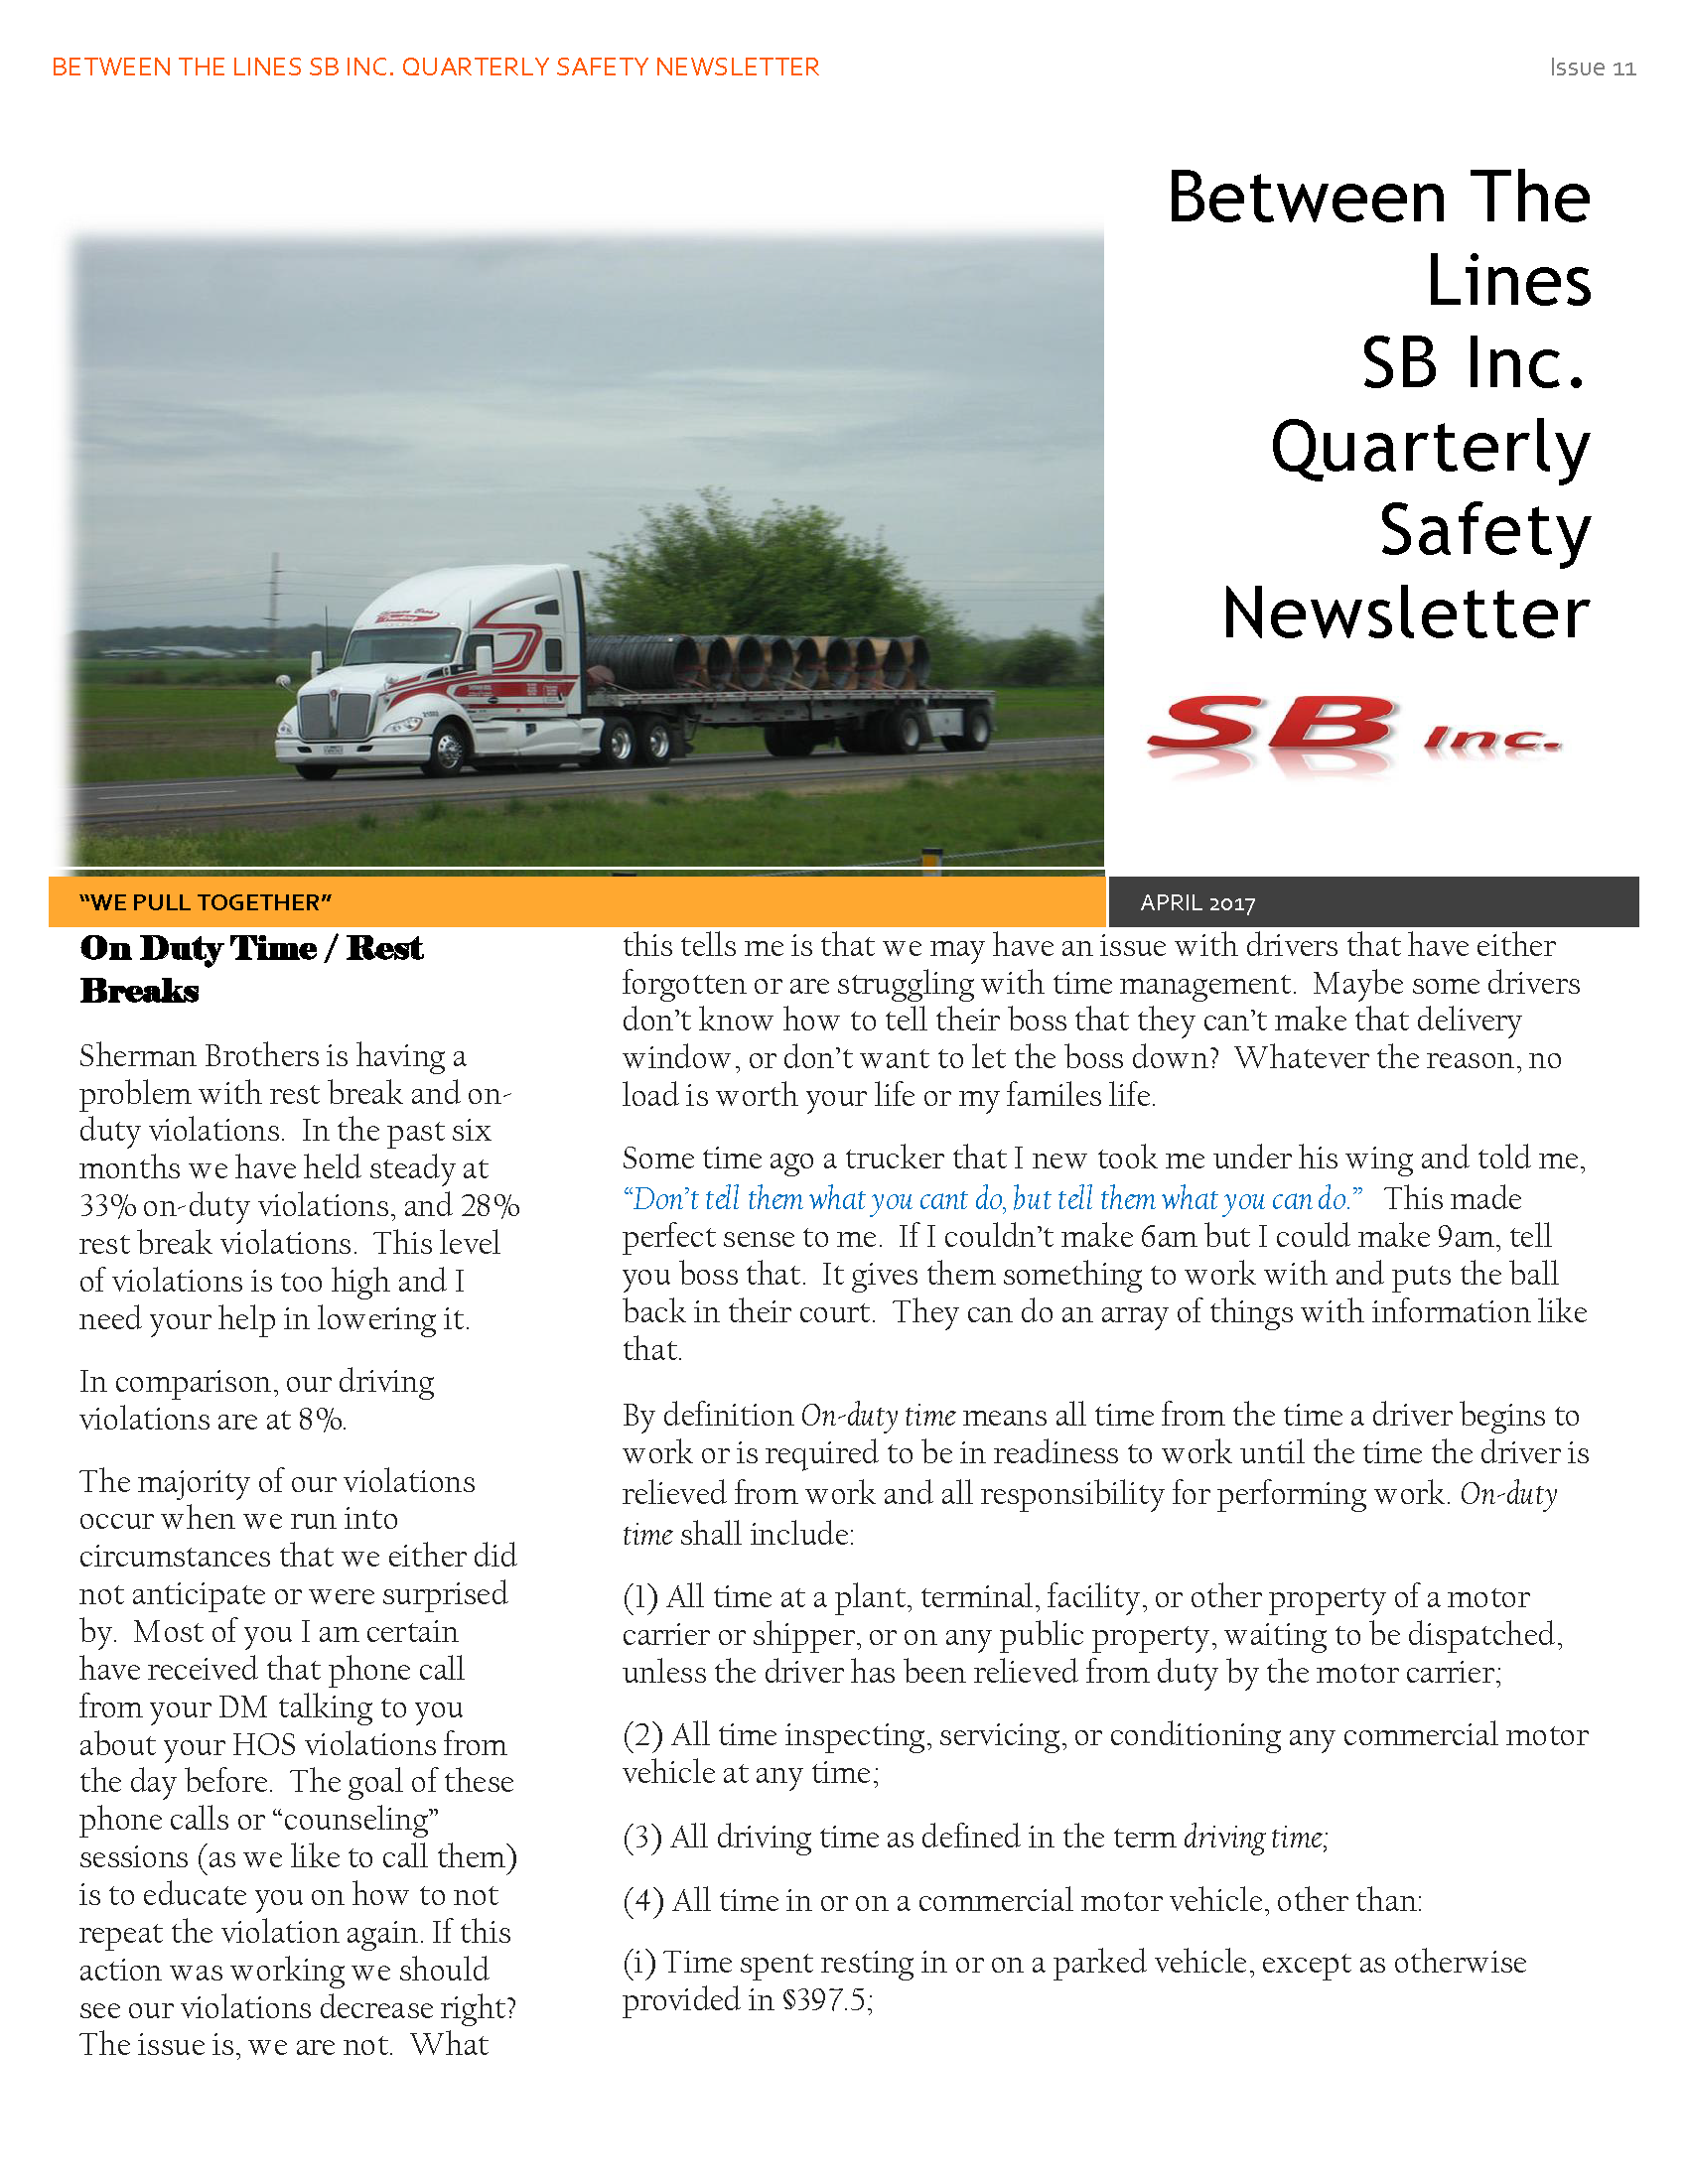 APRIL SAFETY LETTER_Page_1.png